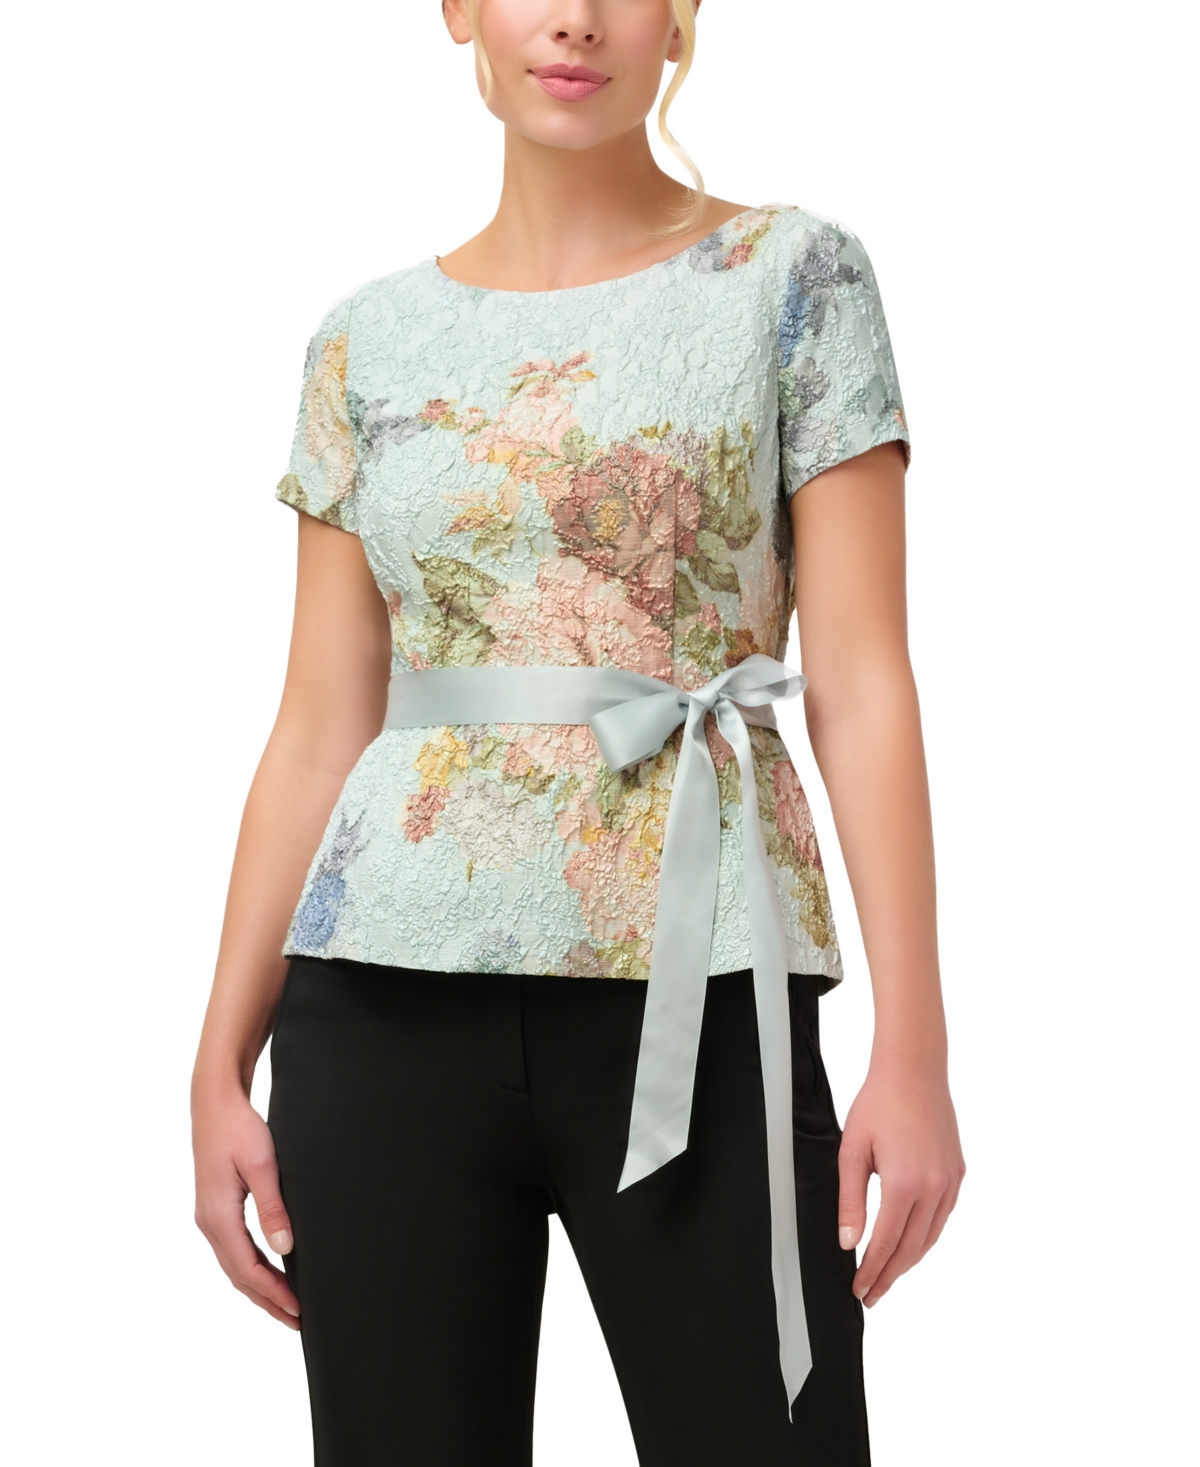  Adrianna Papell Women's Textured Floral-Print Top